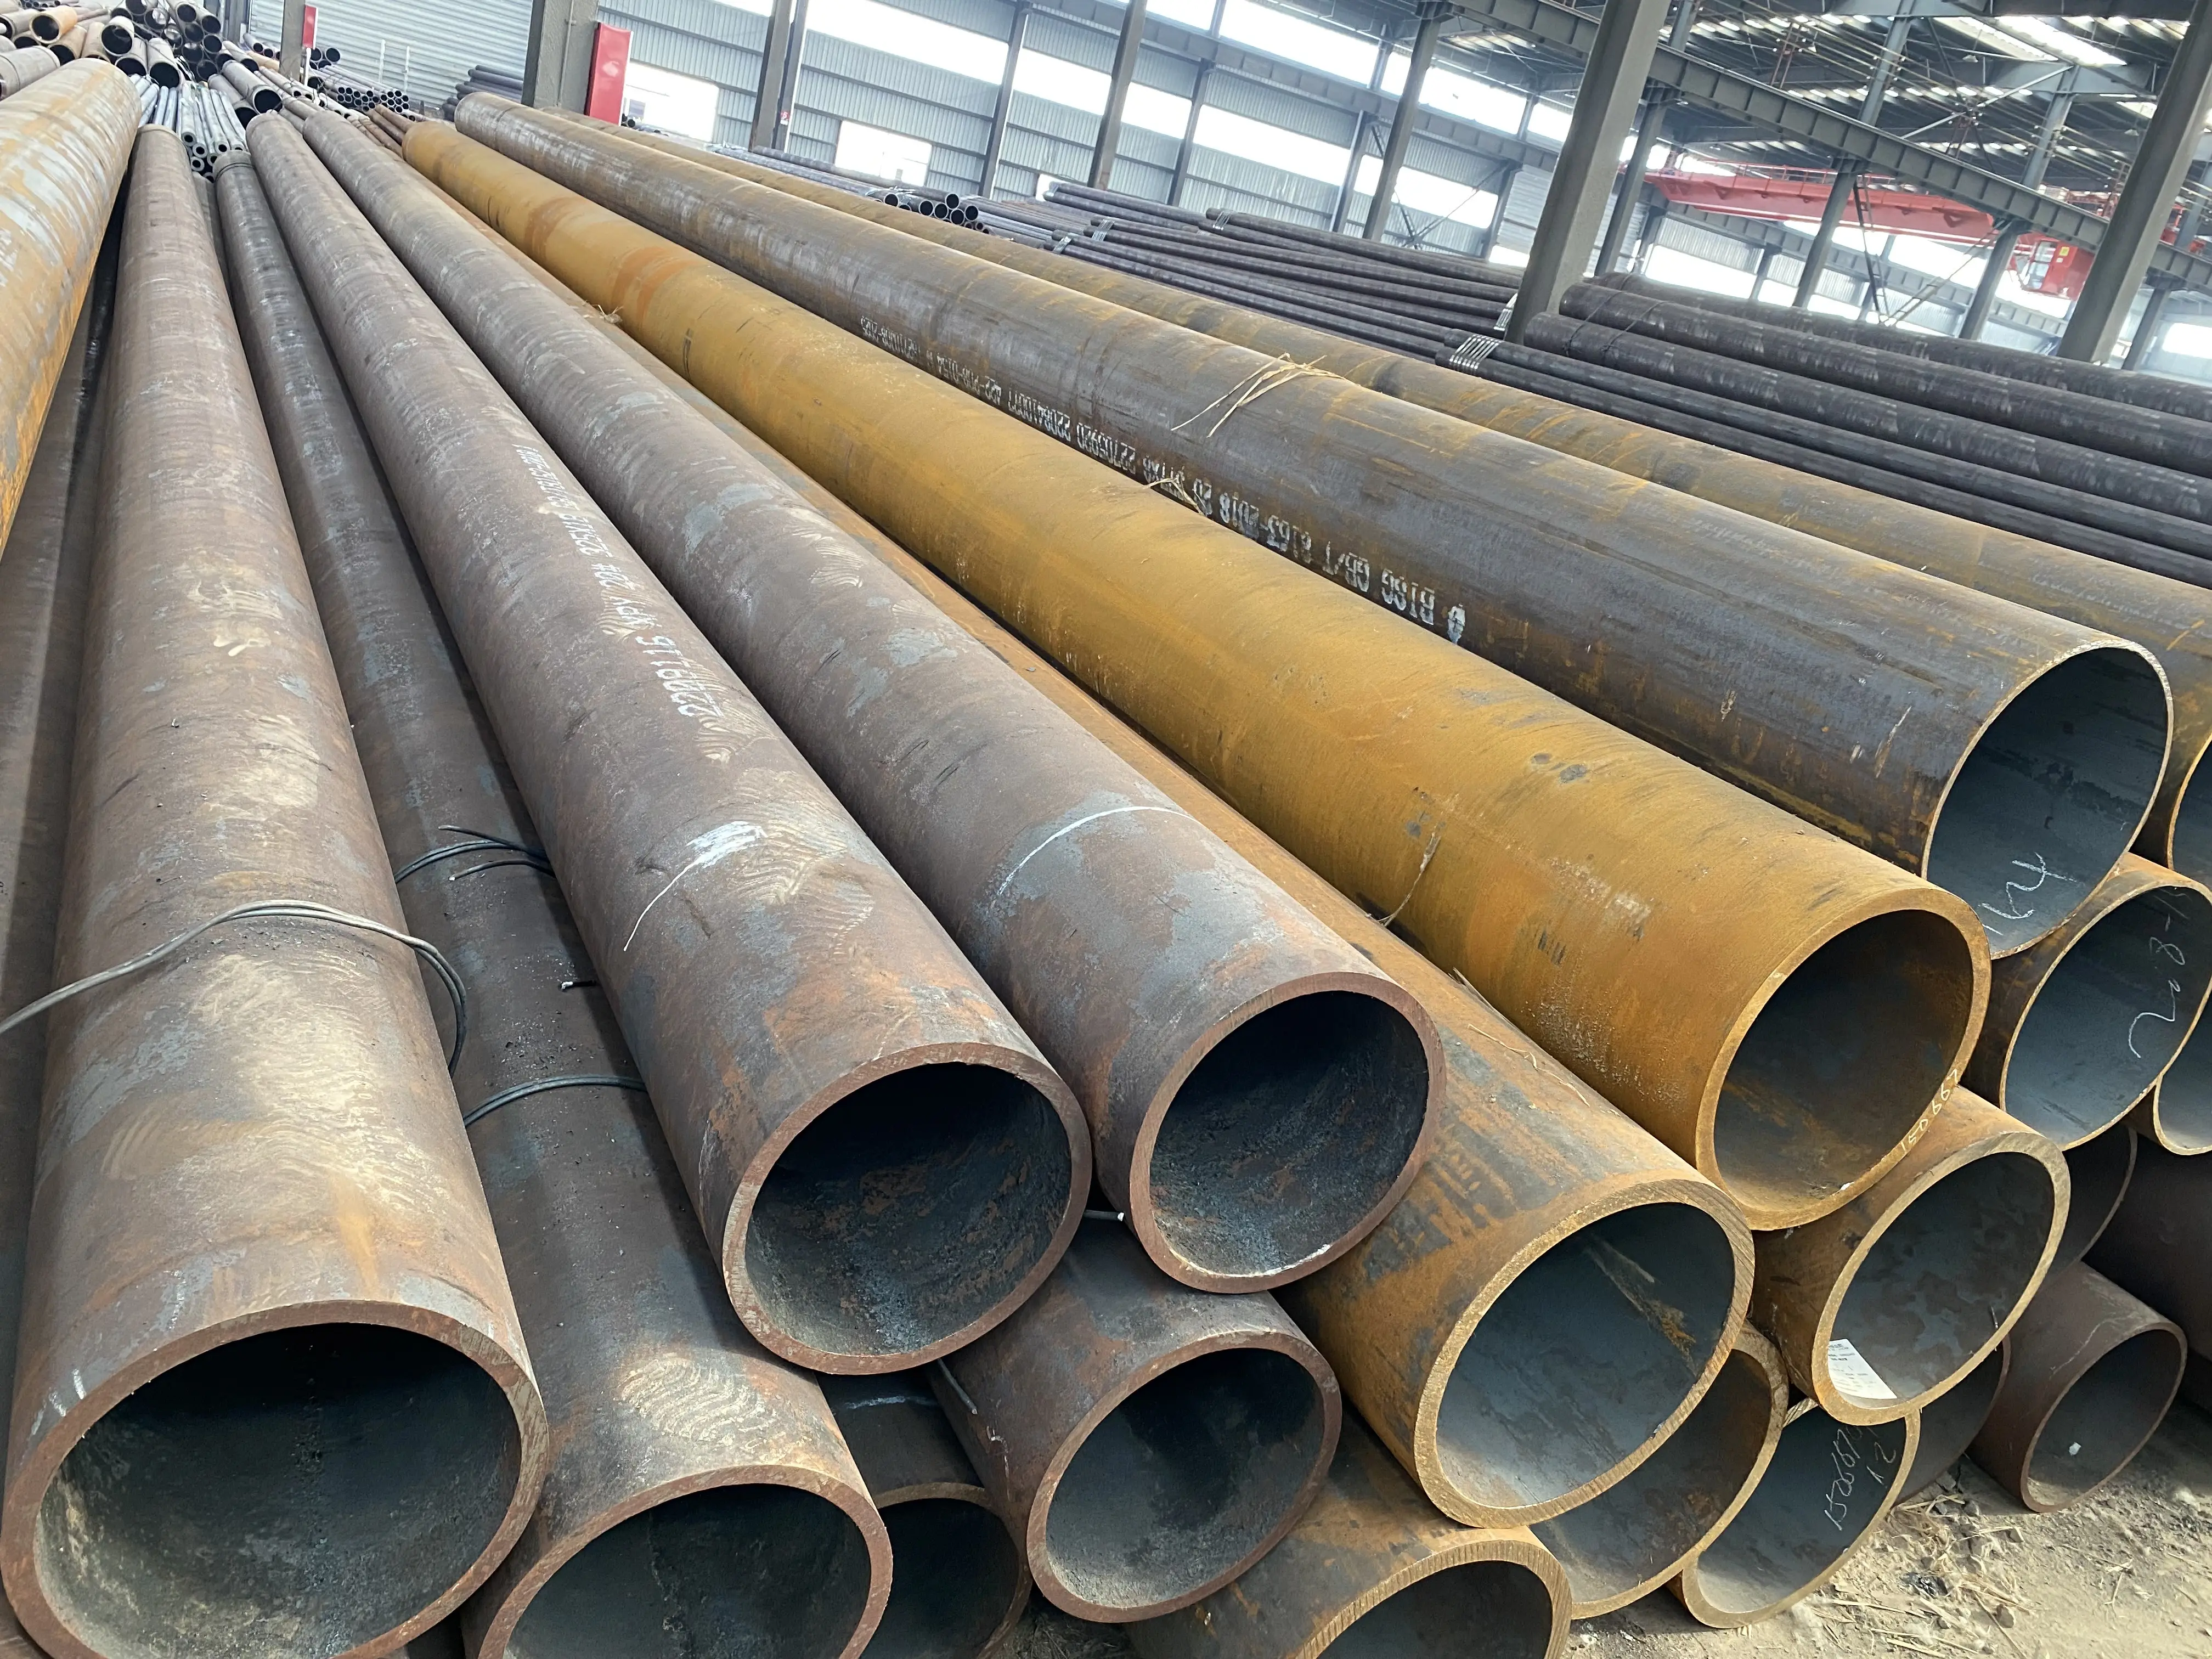 GRADE ASTM A33 seamless steel pipe 6 Inch Sch40 Black Cast Iron Pipe